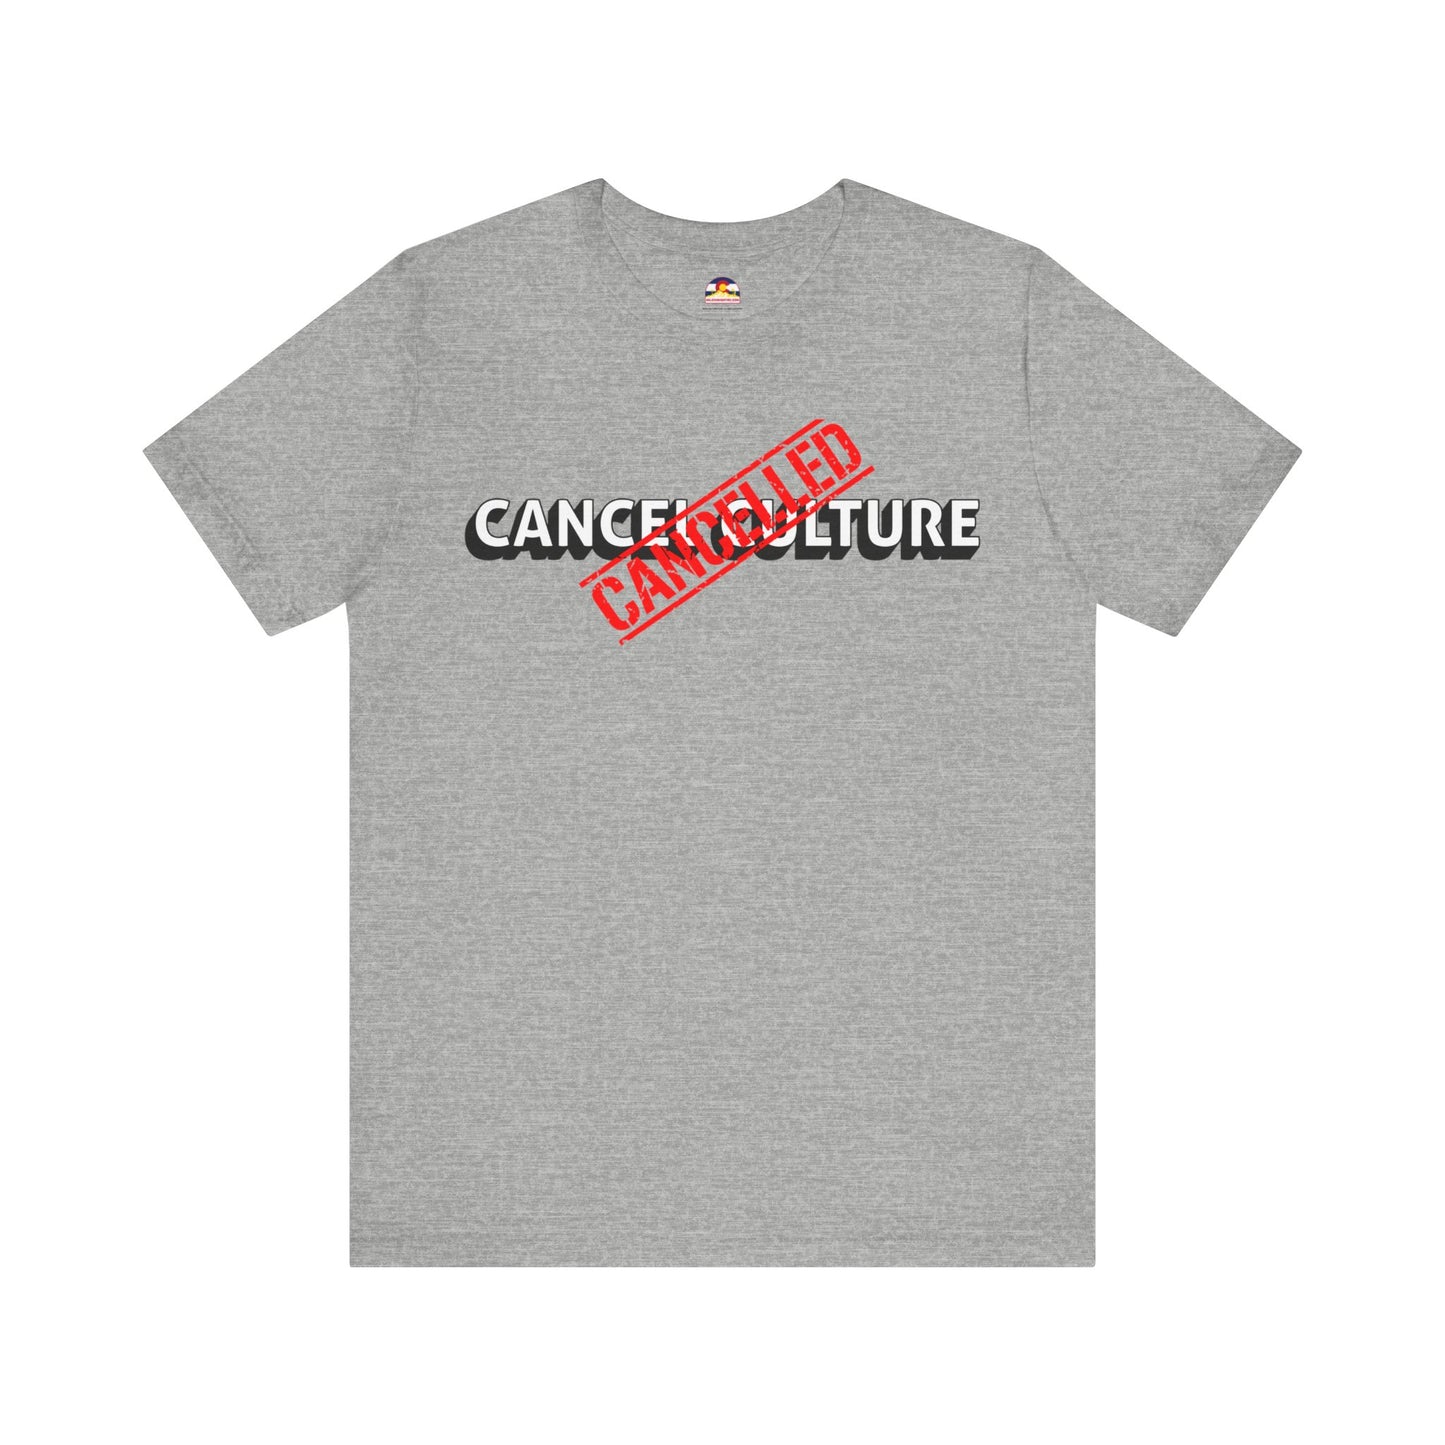 Cancel Culture is Cancelled T-Shirt